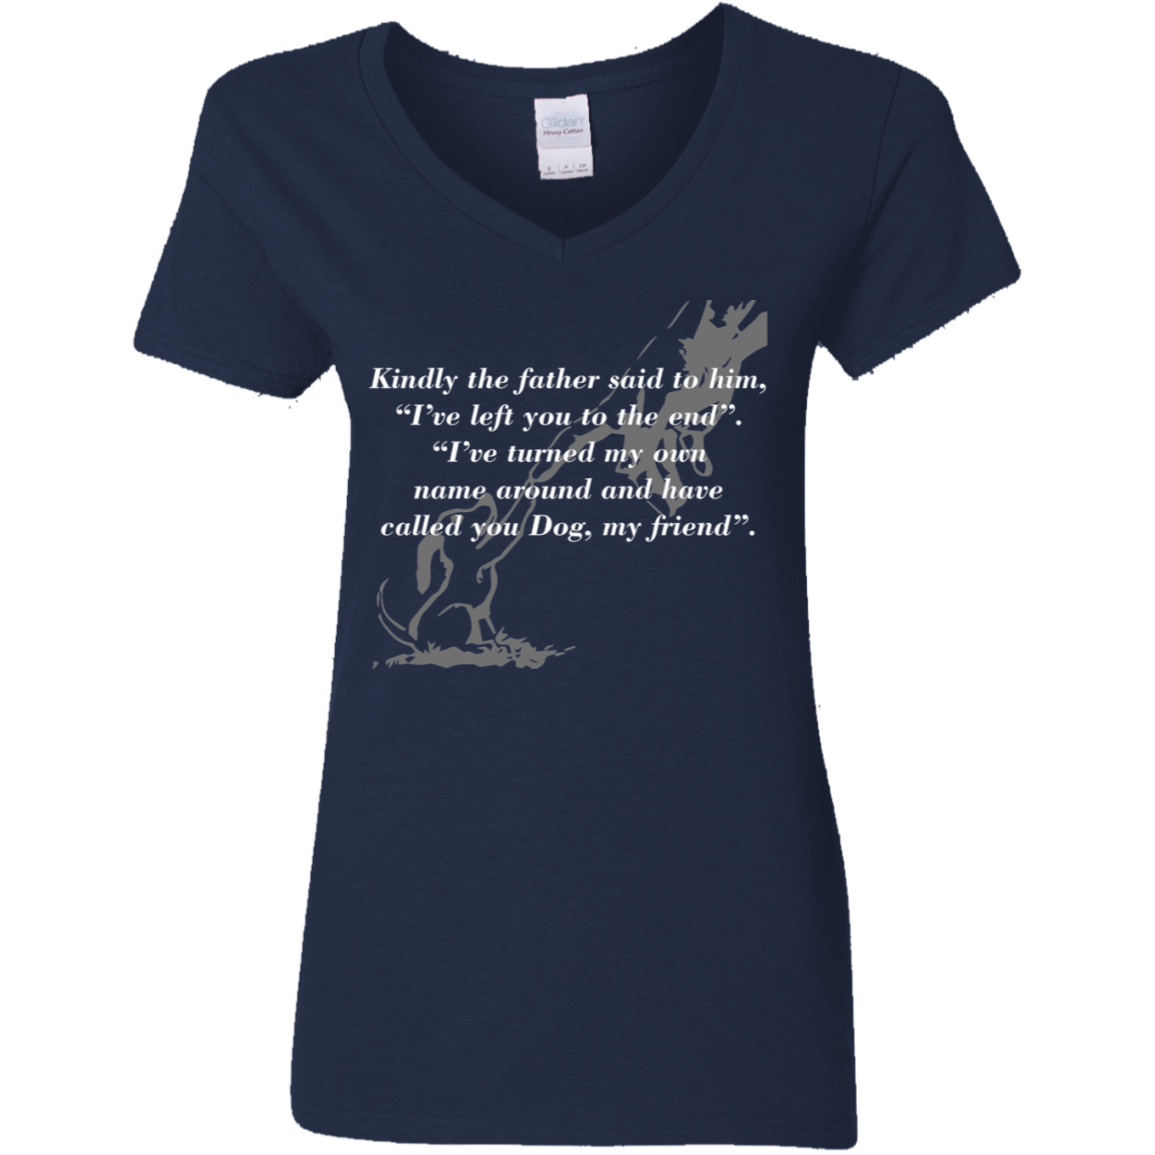 Called You Dog My Friend - Ladies V Neck.